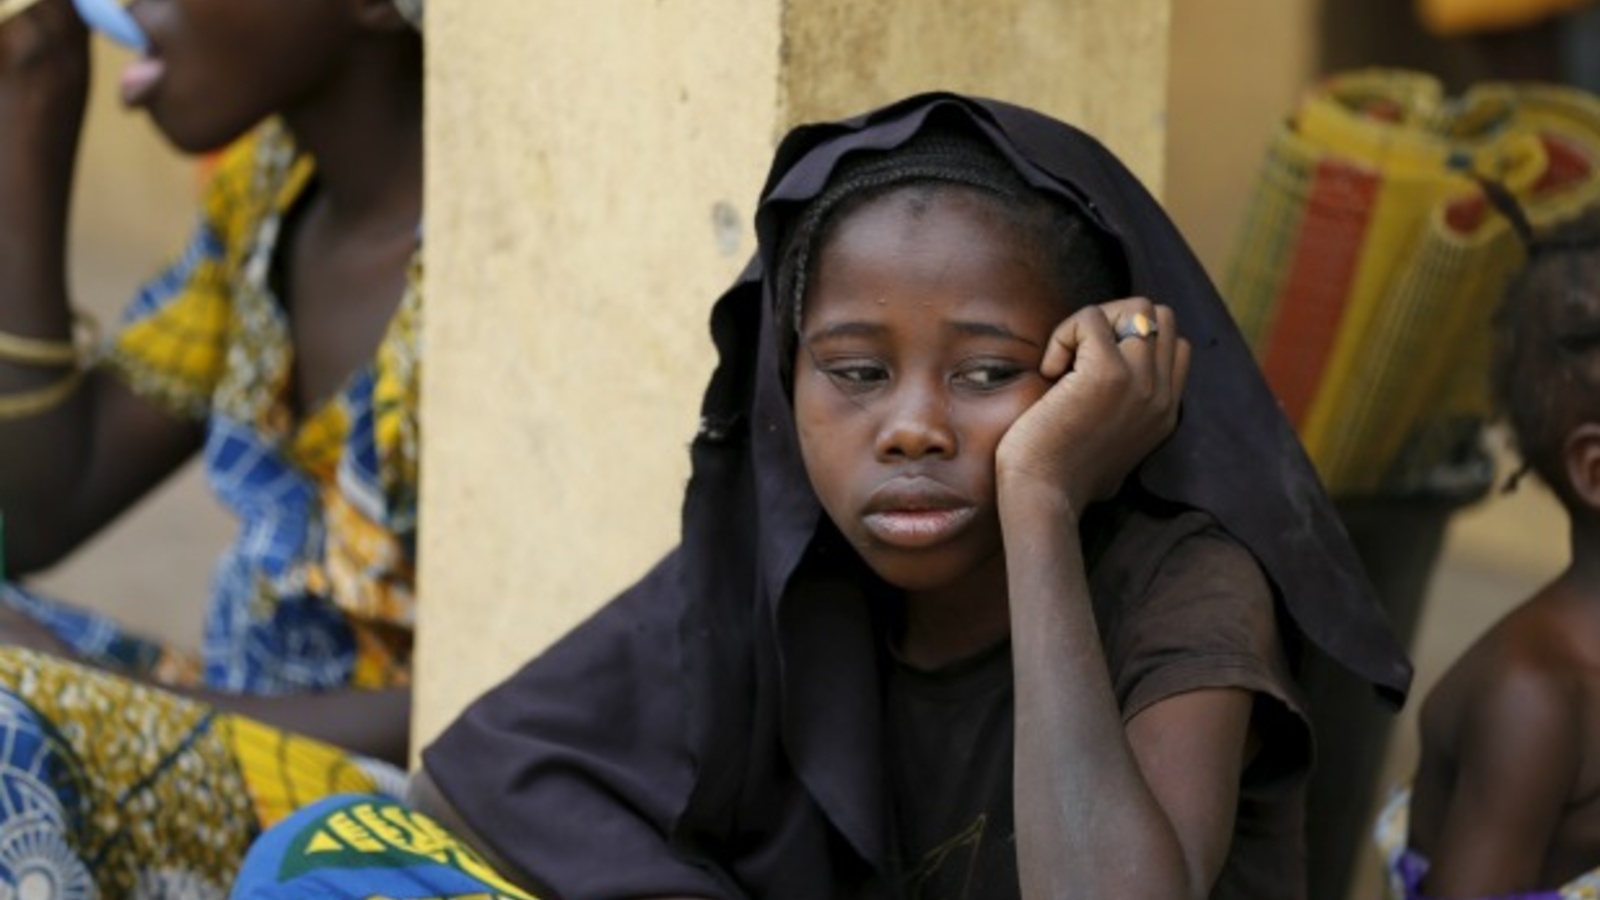 Muslim Kidnap Sex Videos - Boko Haram's Sex Slaves? | Council on Foreign Relations